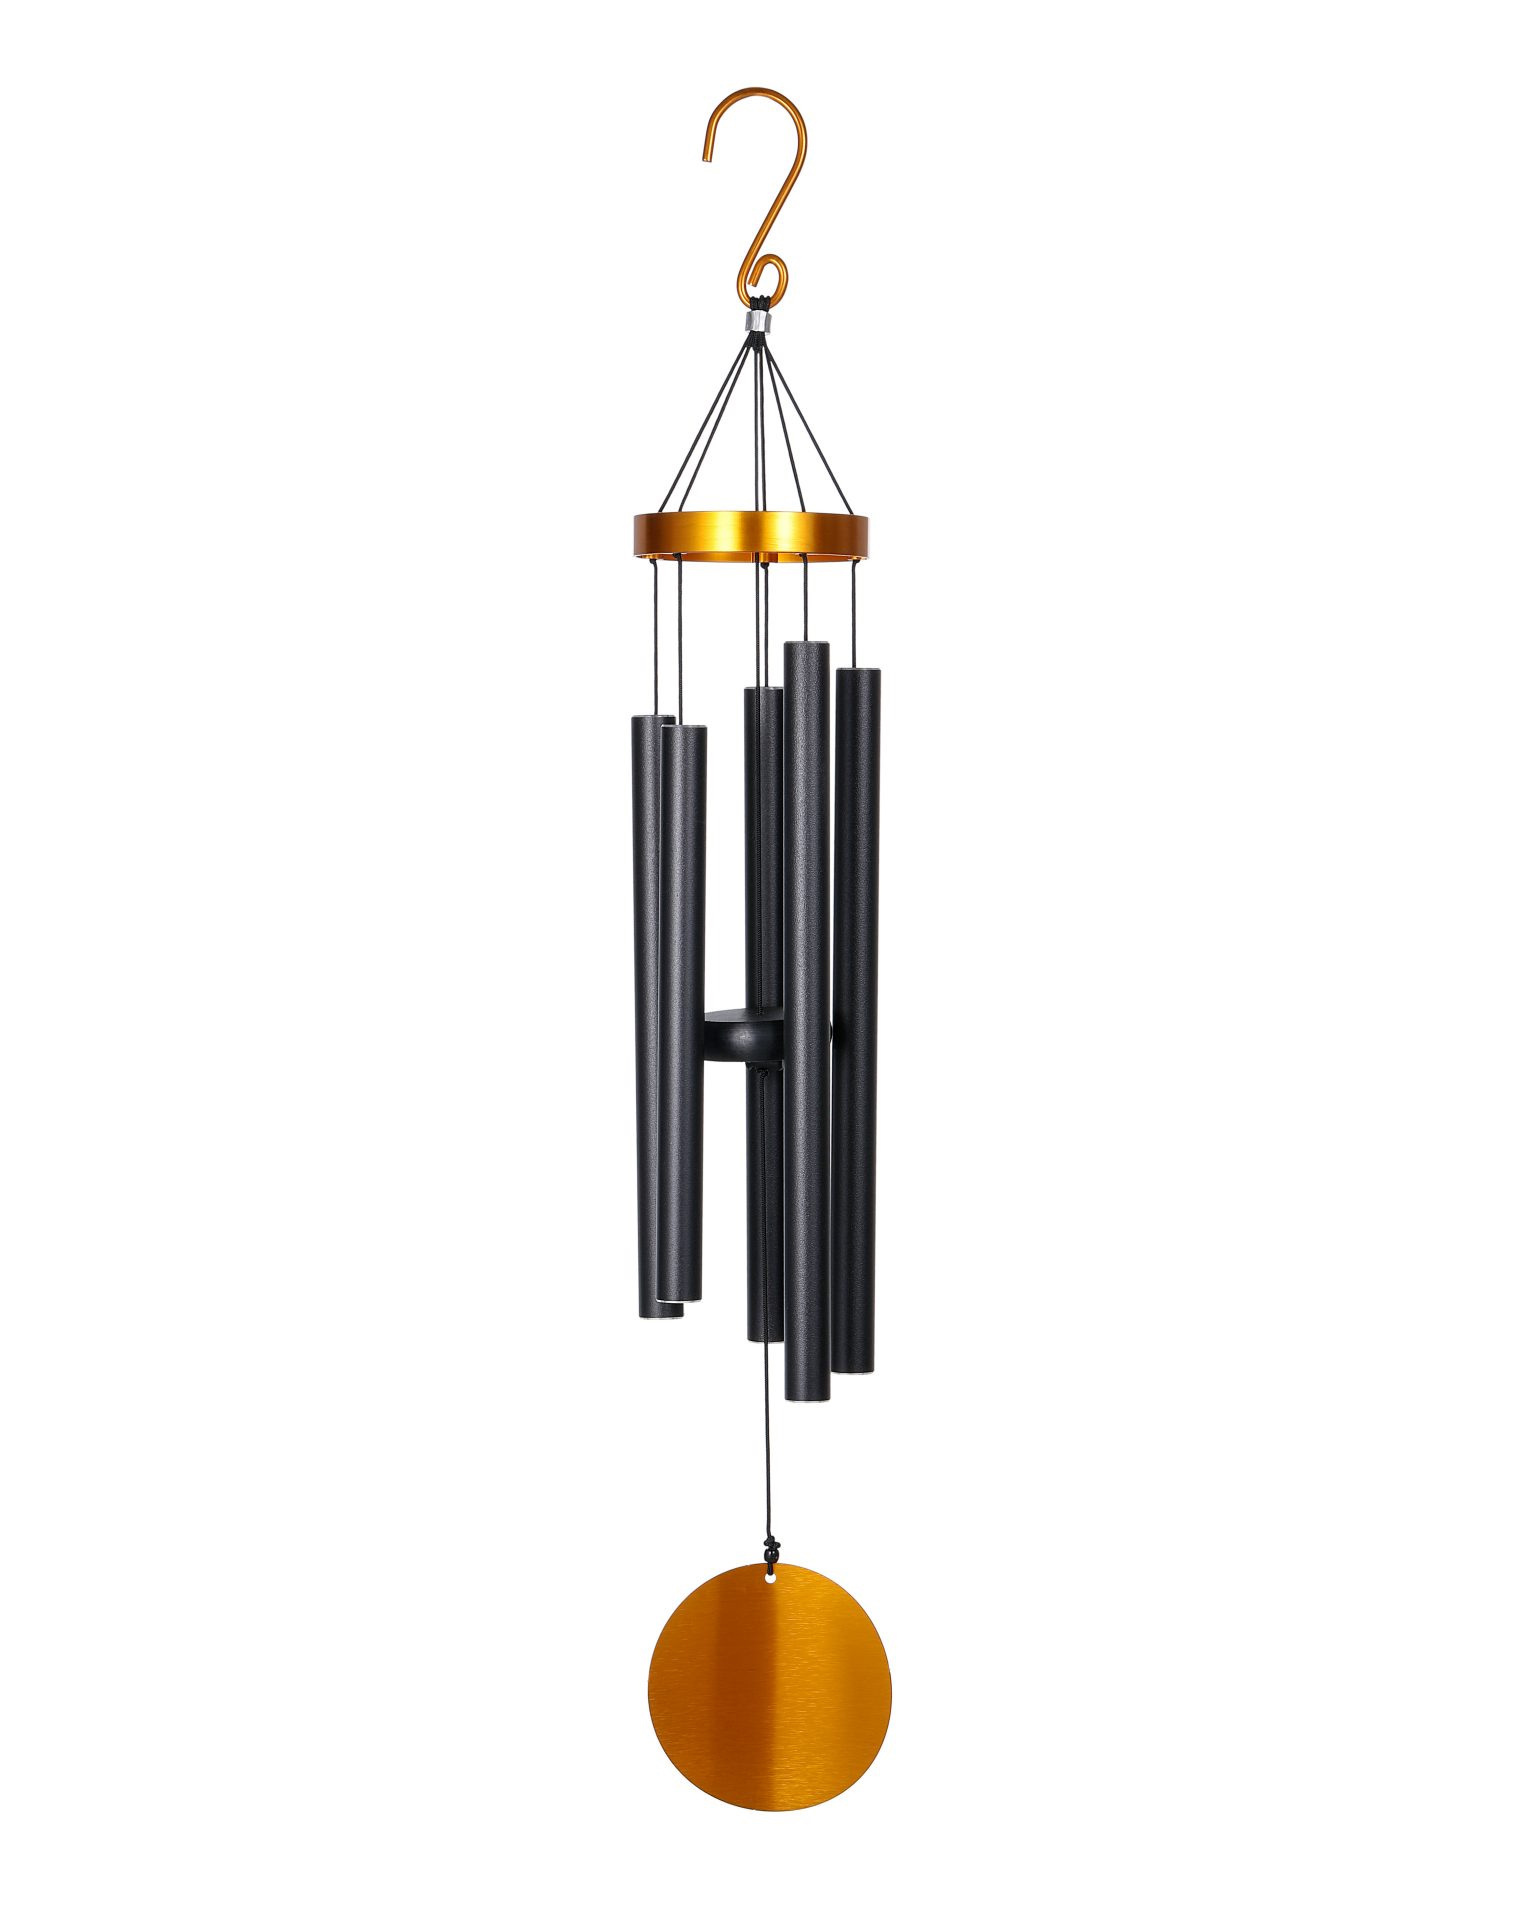 M TAGZ SPORTS UNLIMITED New York Baseball Metal Decorative Hanging Wind Chime 33 inch Long with 2 Day 